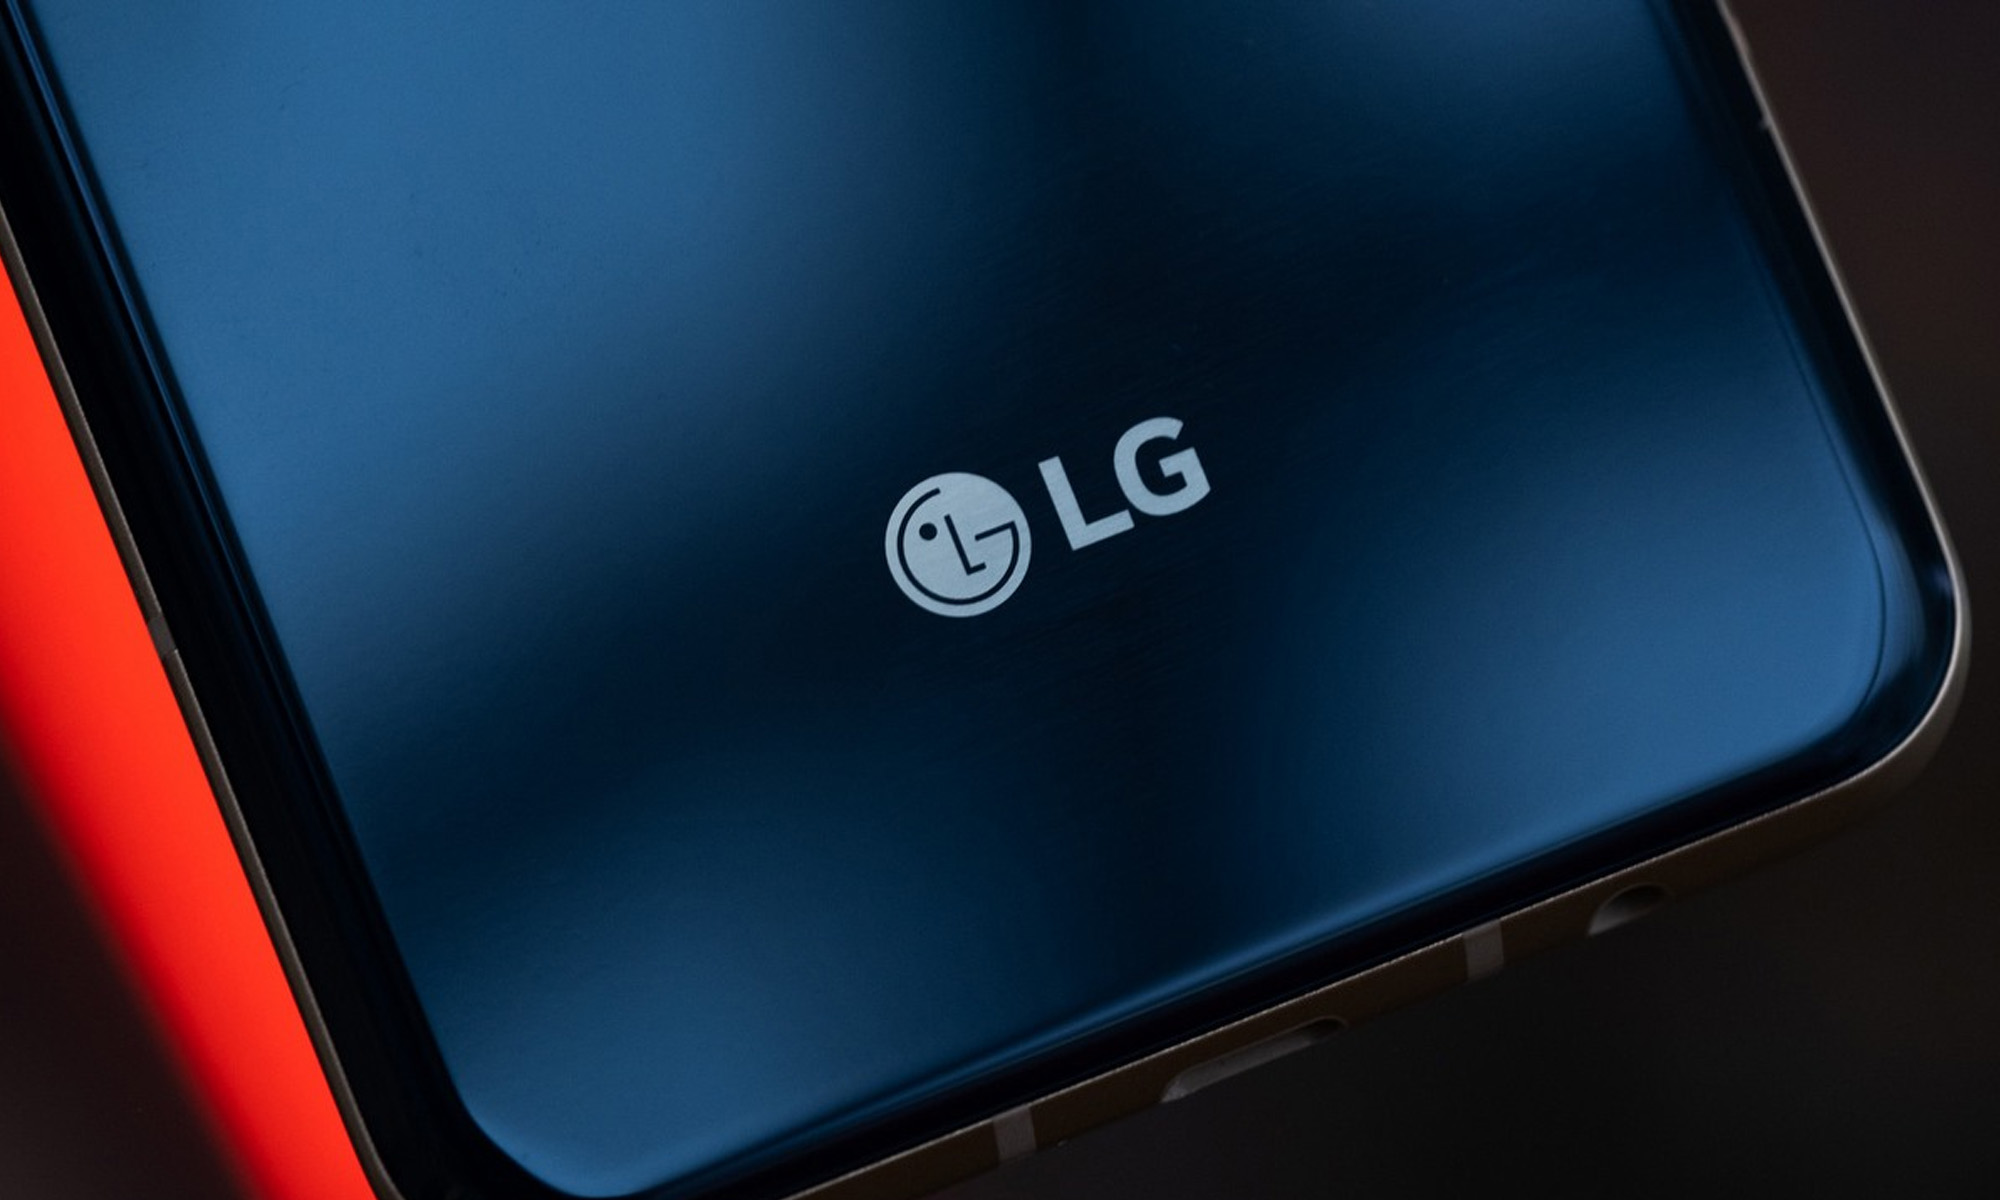 lg to withdraw from smartphone market due to ongoing losses